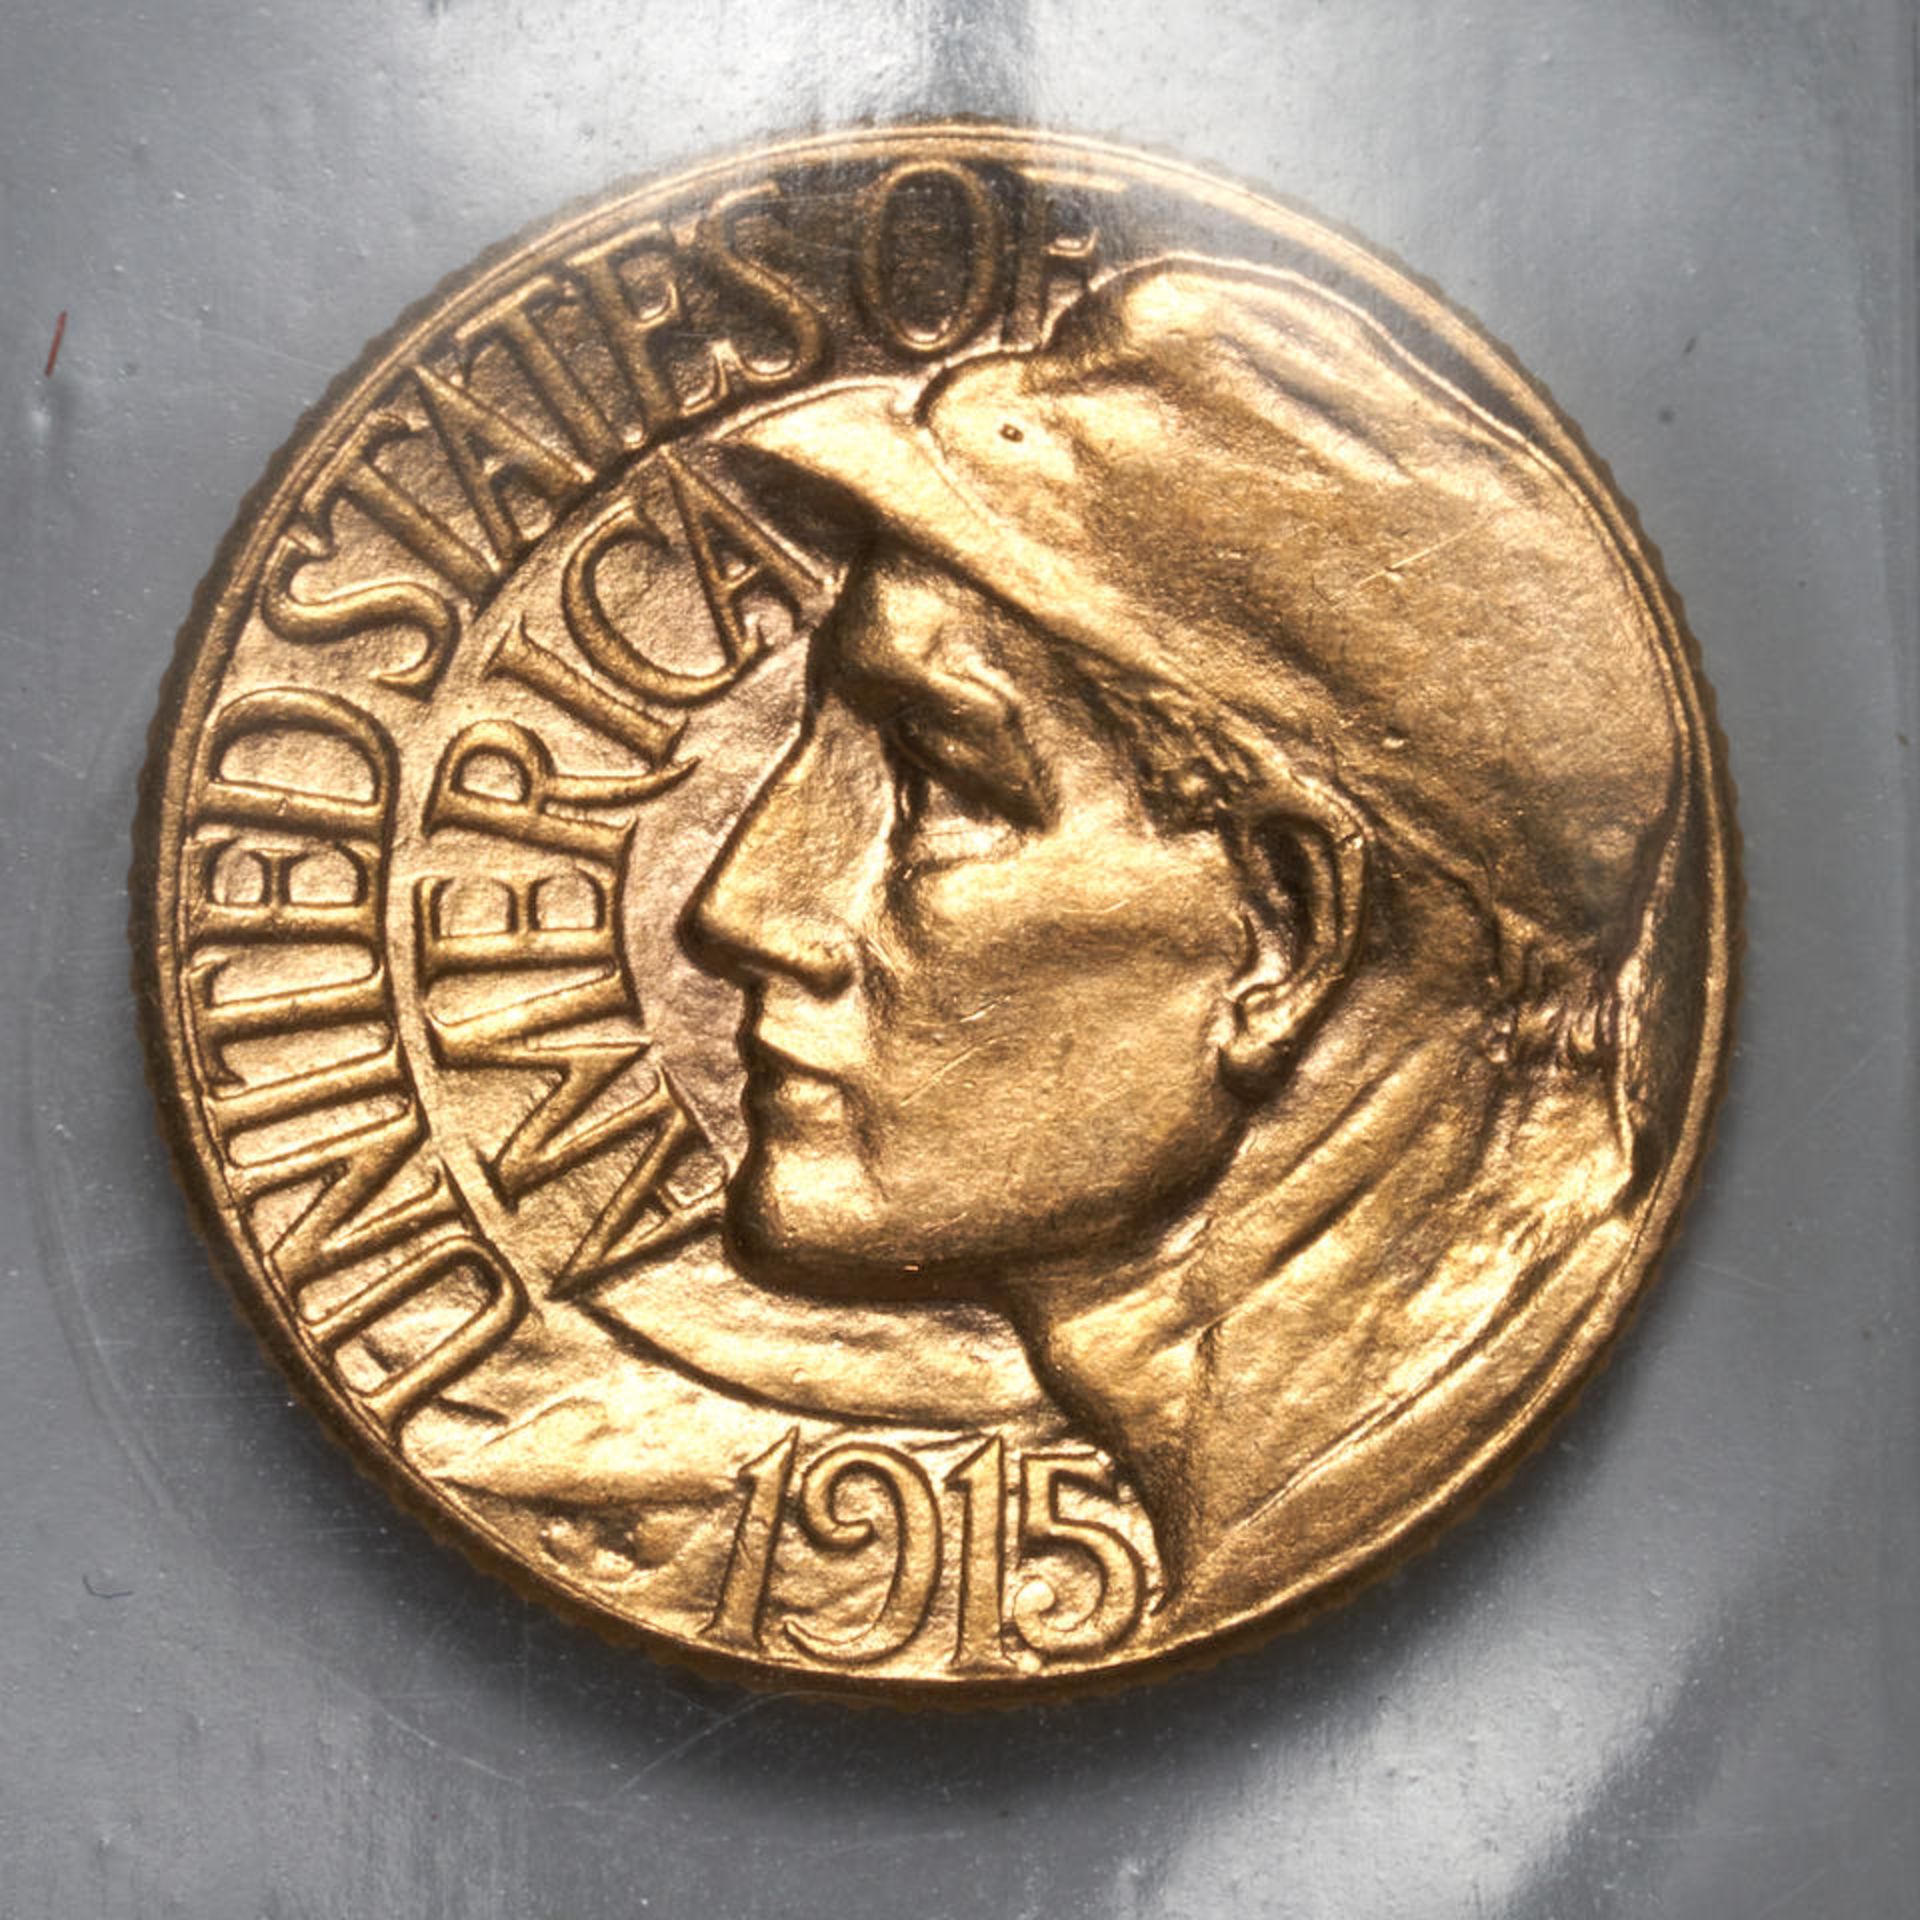 United States 1915-S Panama-Pacific Gold Dollar. - Image 3 of 4